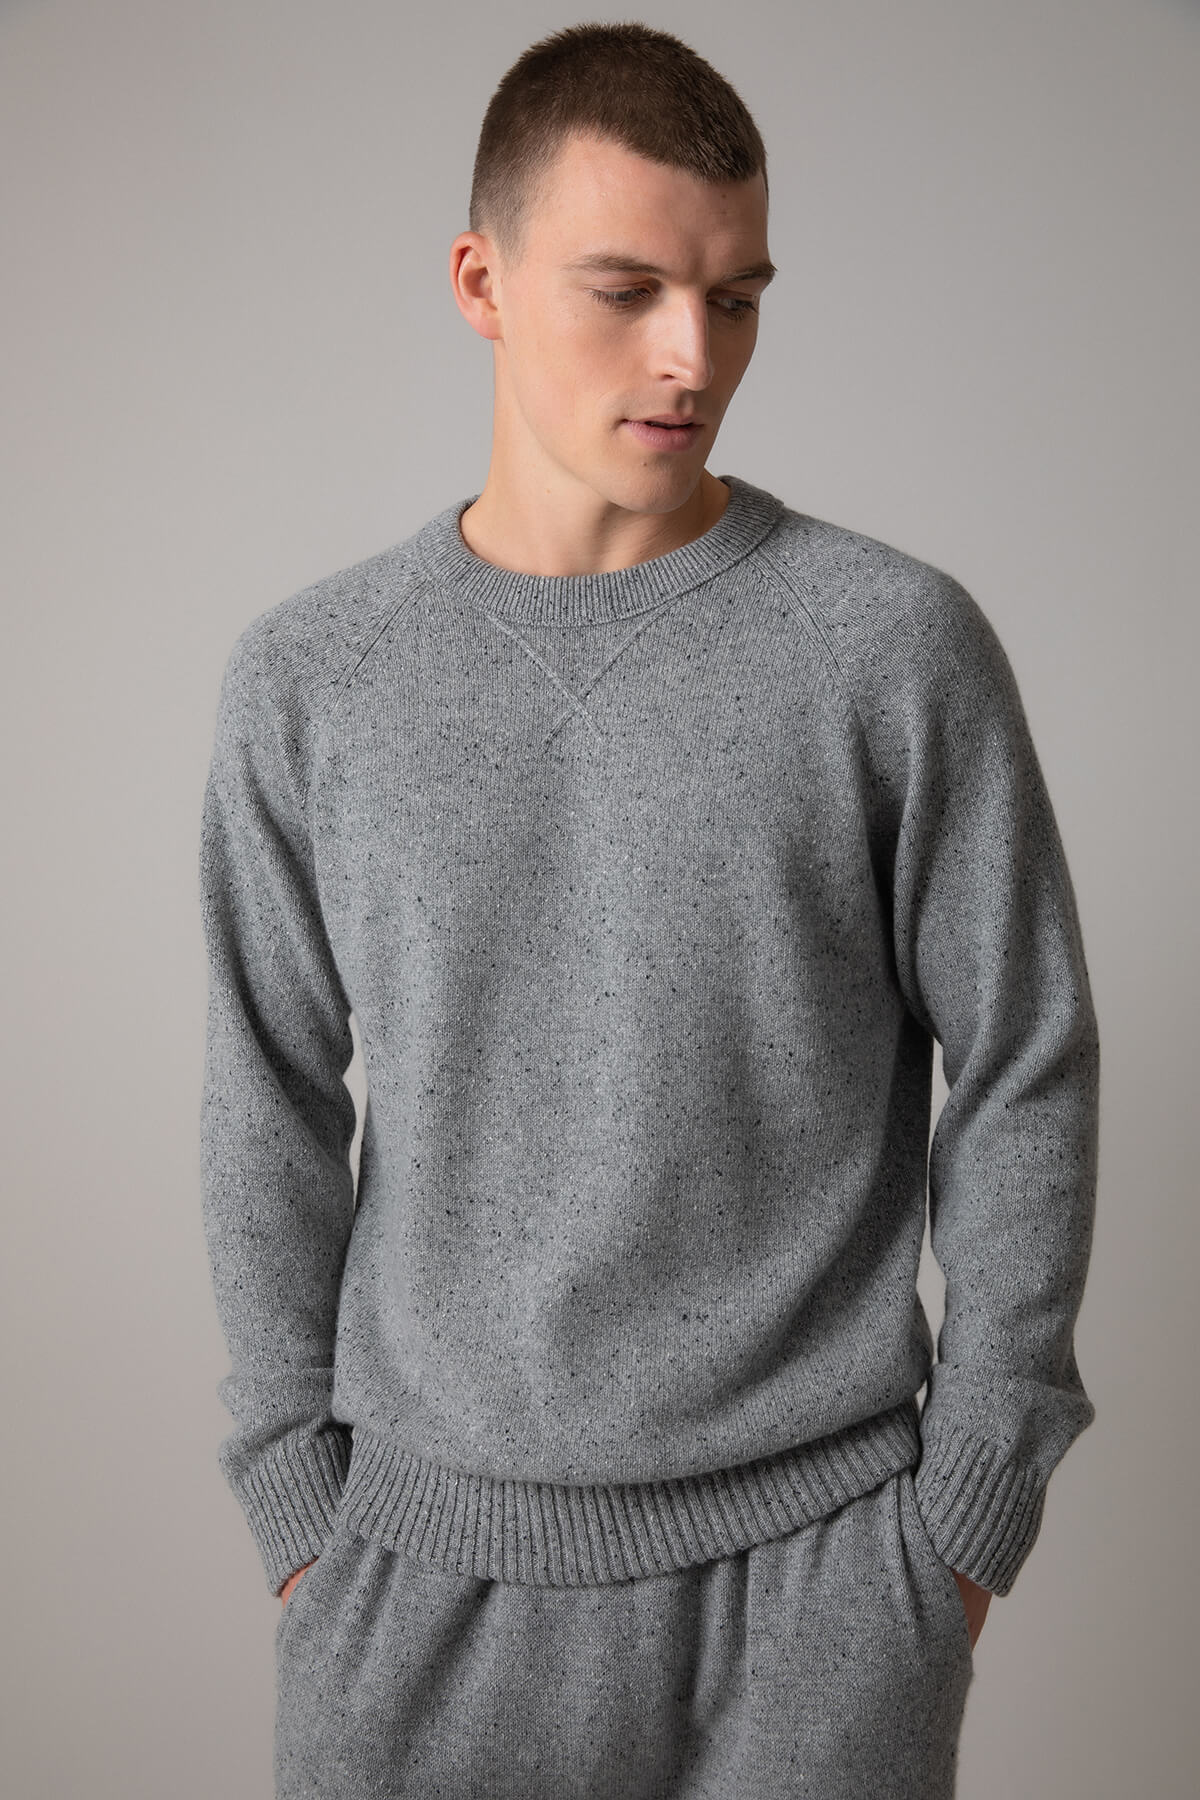 Johnstons of Elgin’s Men's Cashmere Donegal Sweatshirt in Light grey on model wearing matching grey joggers on a grey background KAA05147004542